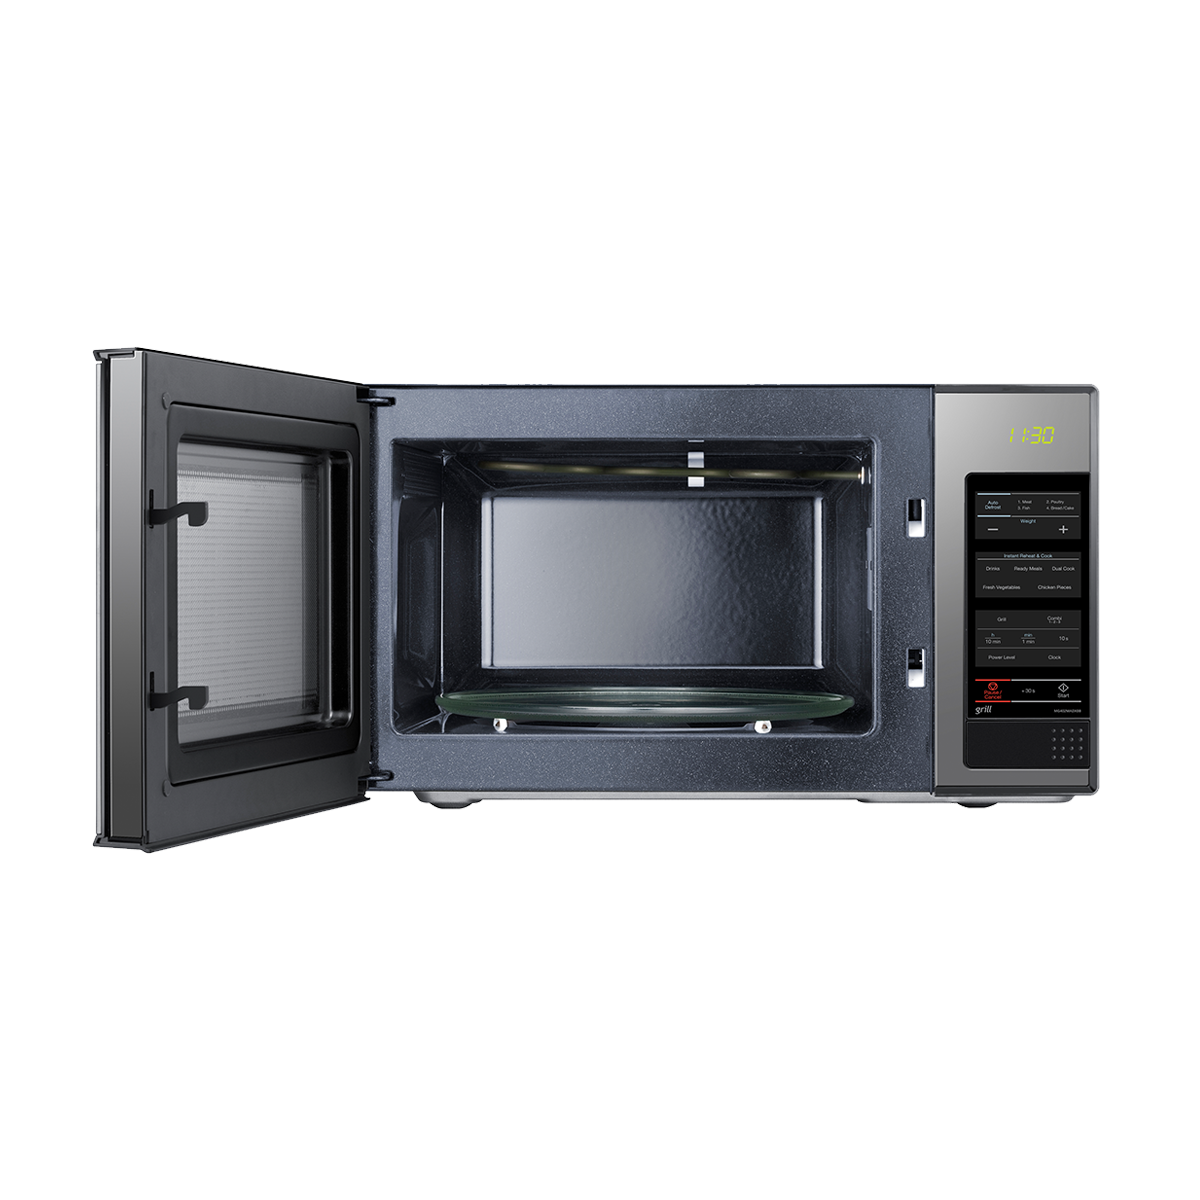 Samsung Microwave Oven + Grill & Auto Cook